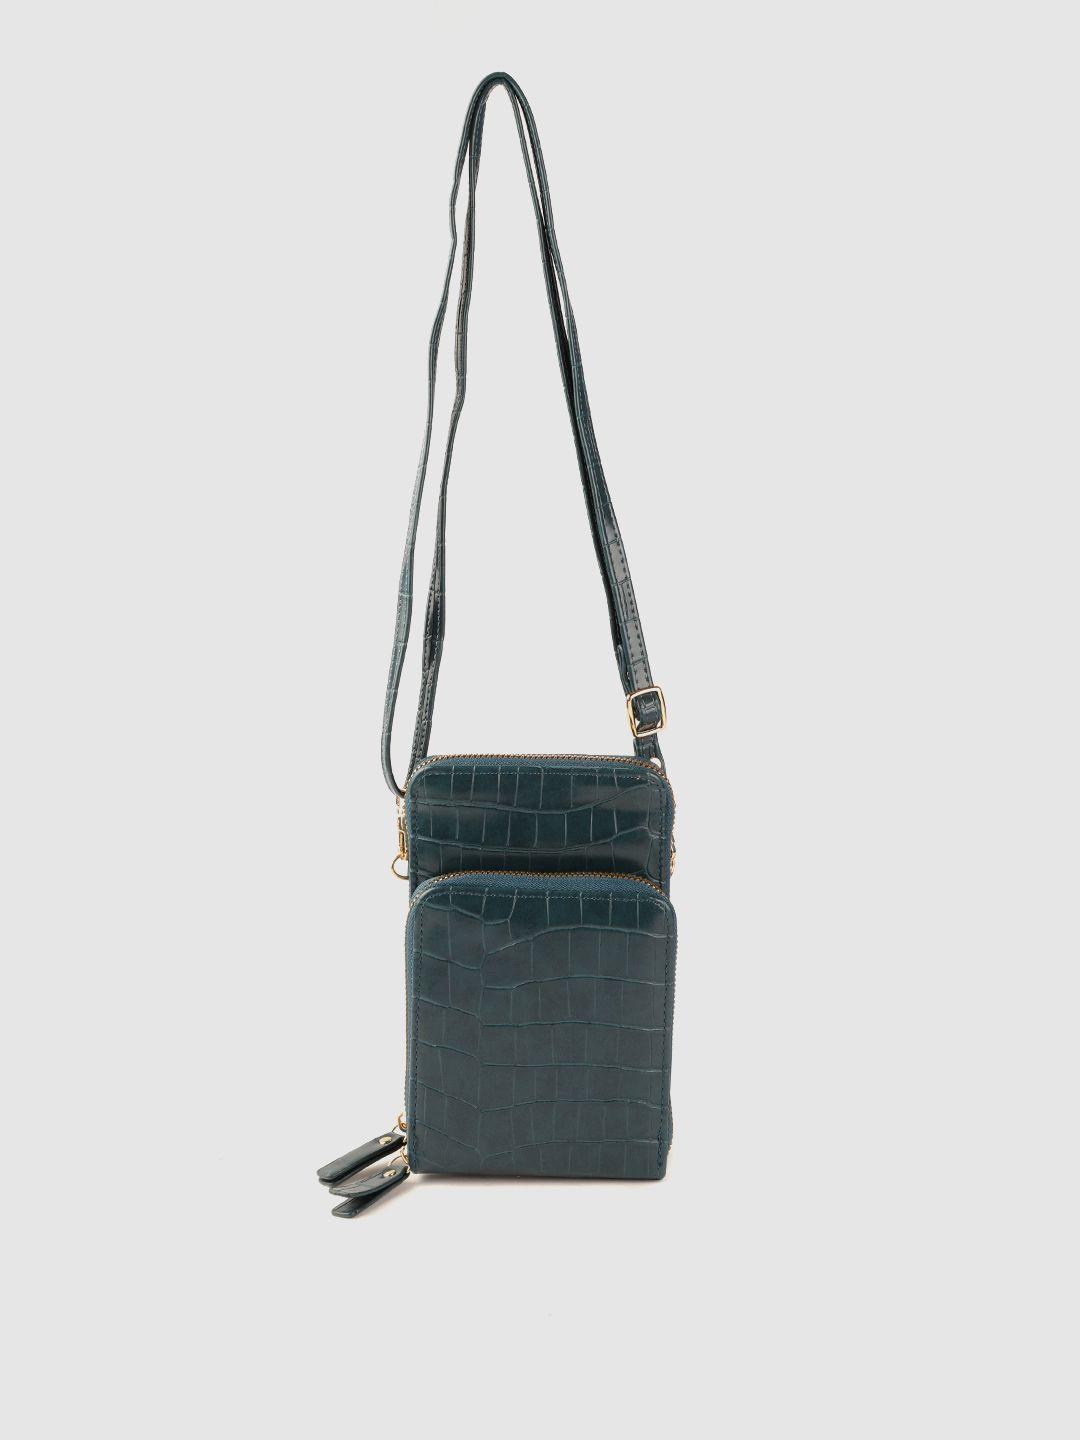 lino perros teal blue croc textured structured sling bag with detachable sling strap